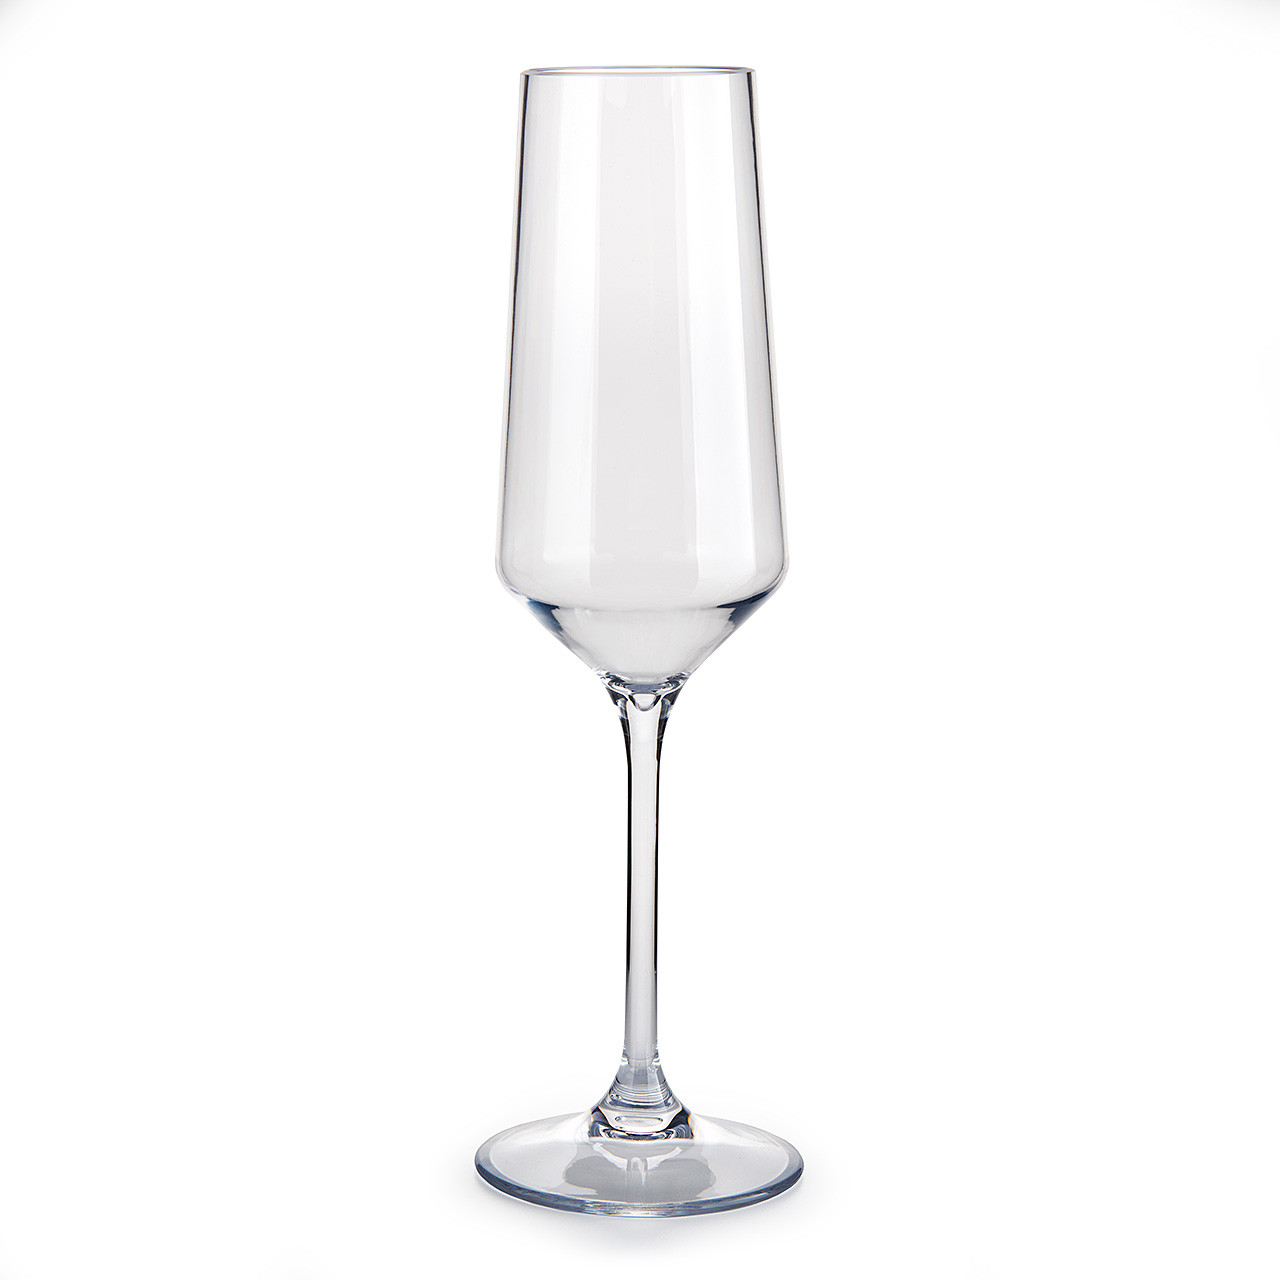 https://cdn11.bigcommerce.com/s-mm9ficts64/images/stencil/1280x1280/products/51004/131592/leadingware-10oz-acryllic-champagne-flute-4253938__85475.1680032790.jpg?c=1&imbypass=on